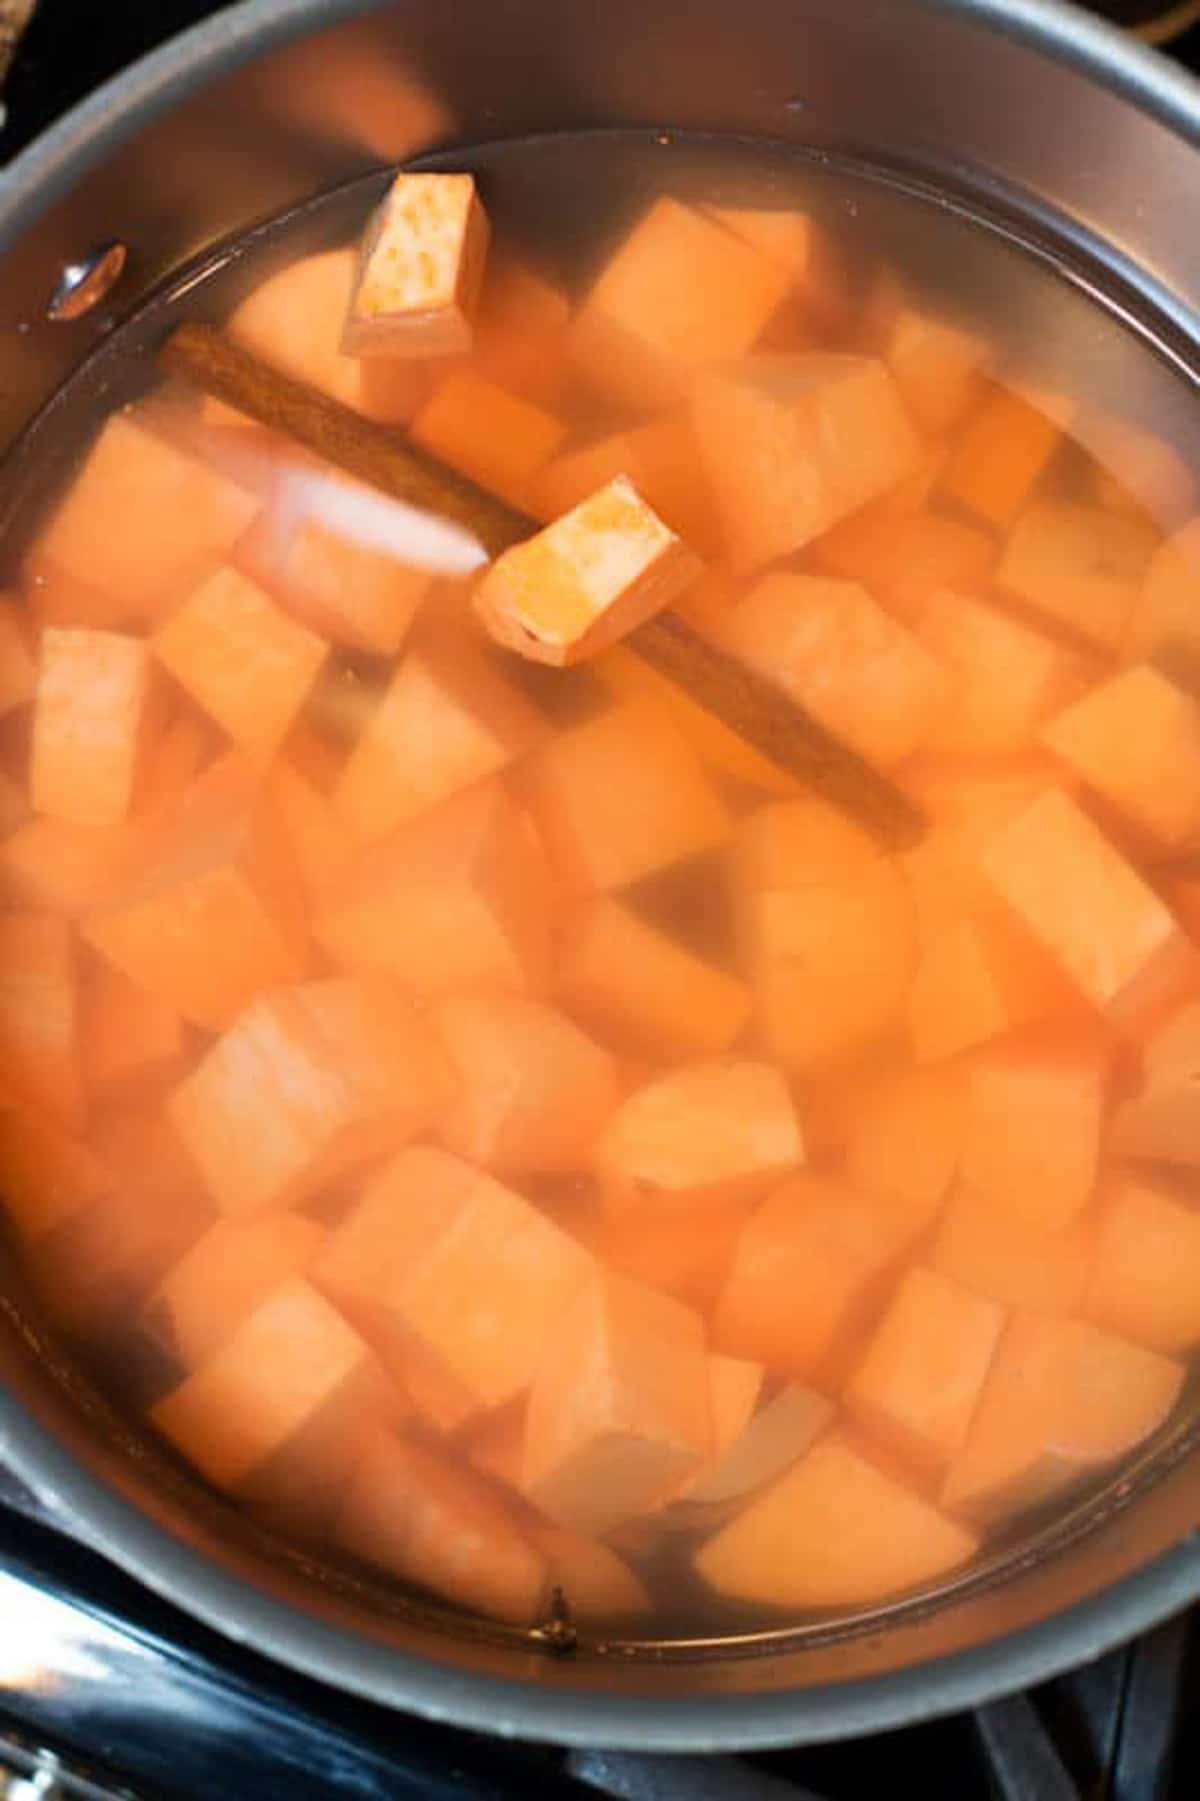 Pot filled with water and chopped sweet potatoes and a cinnamon stick.